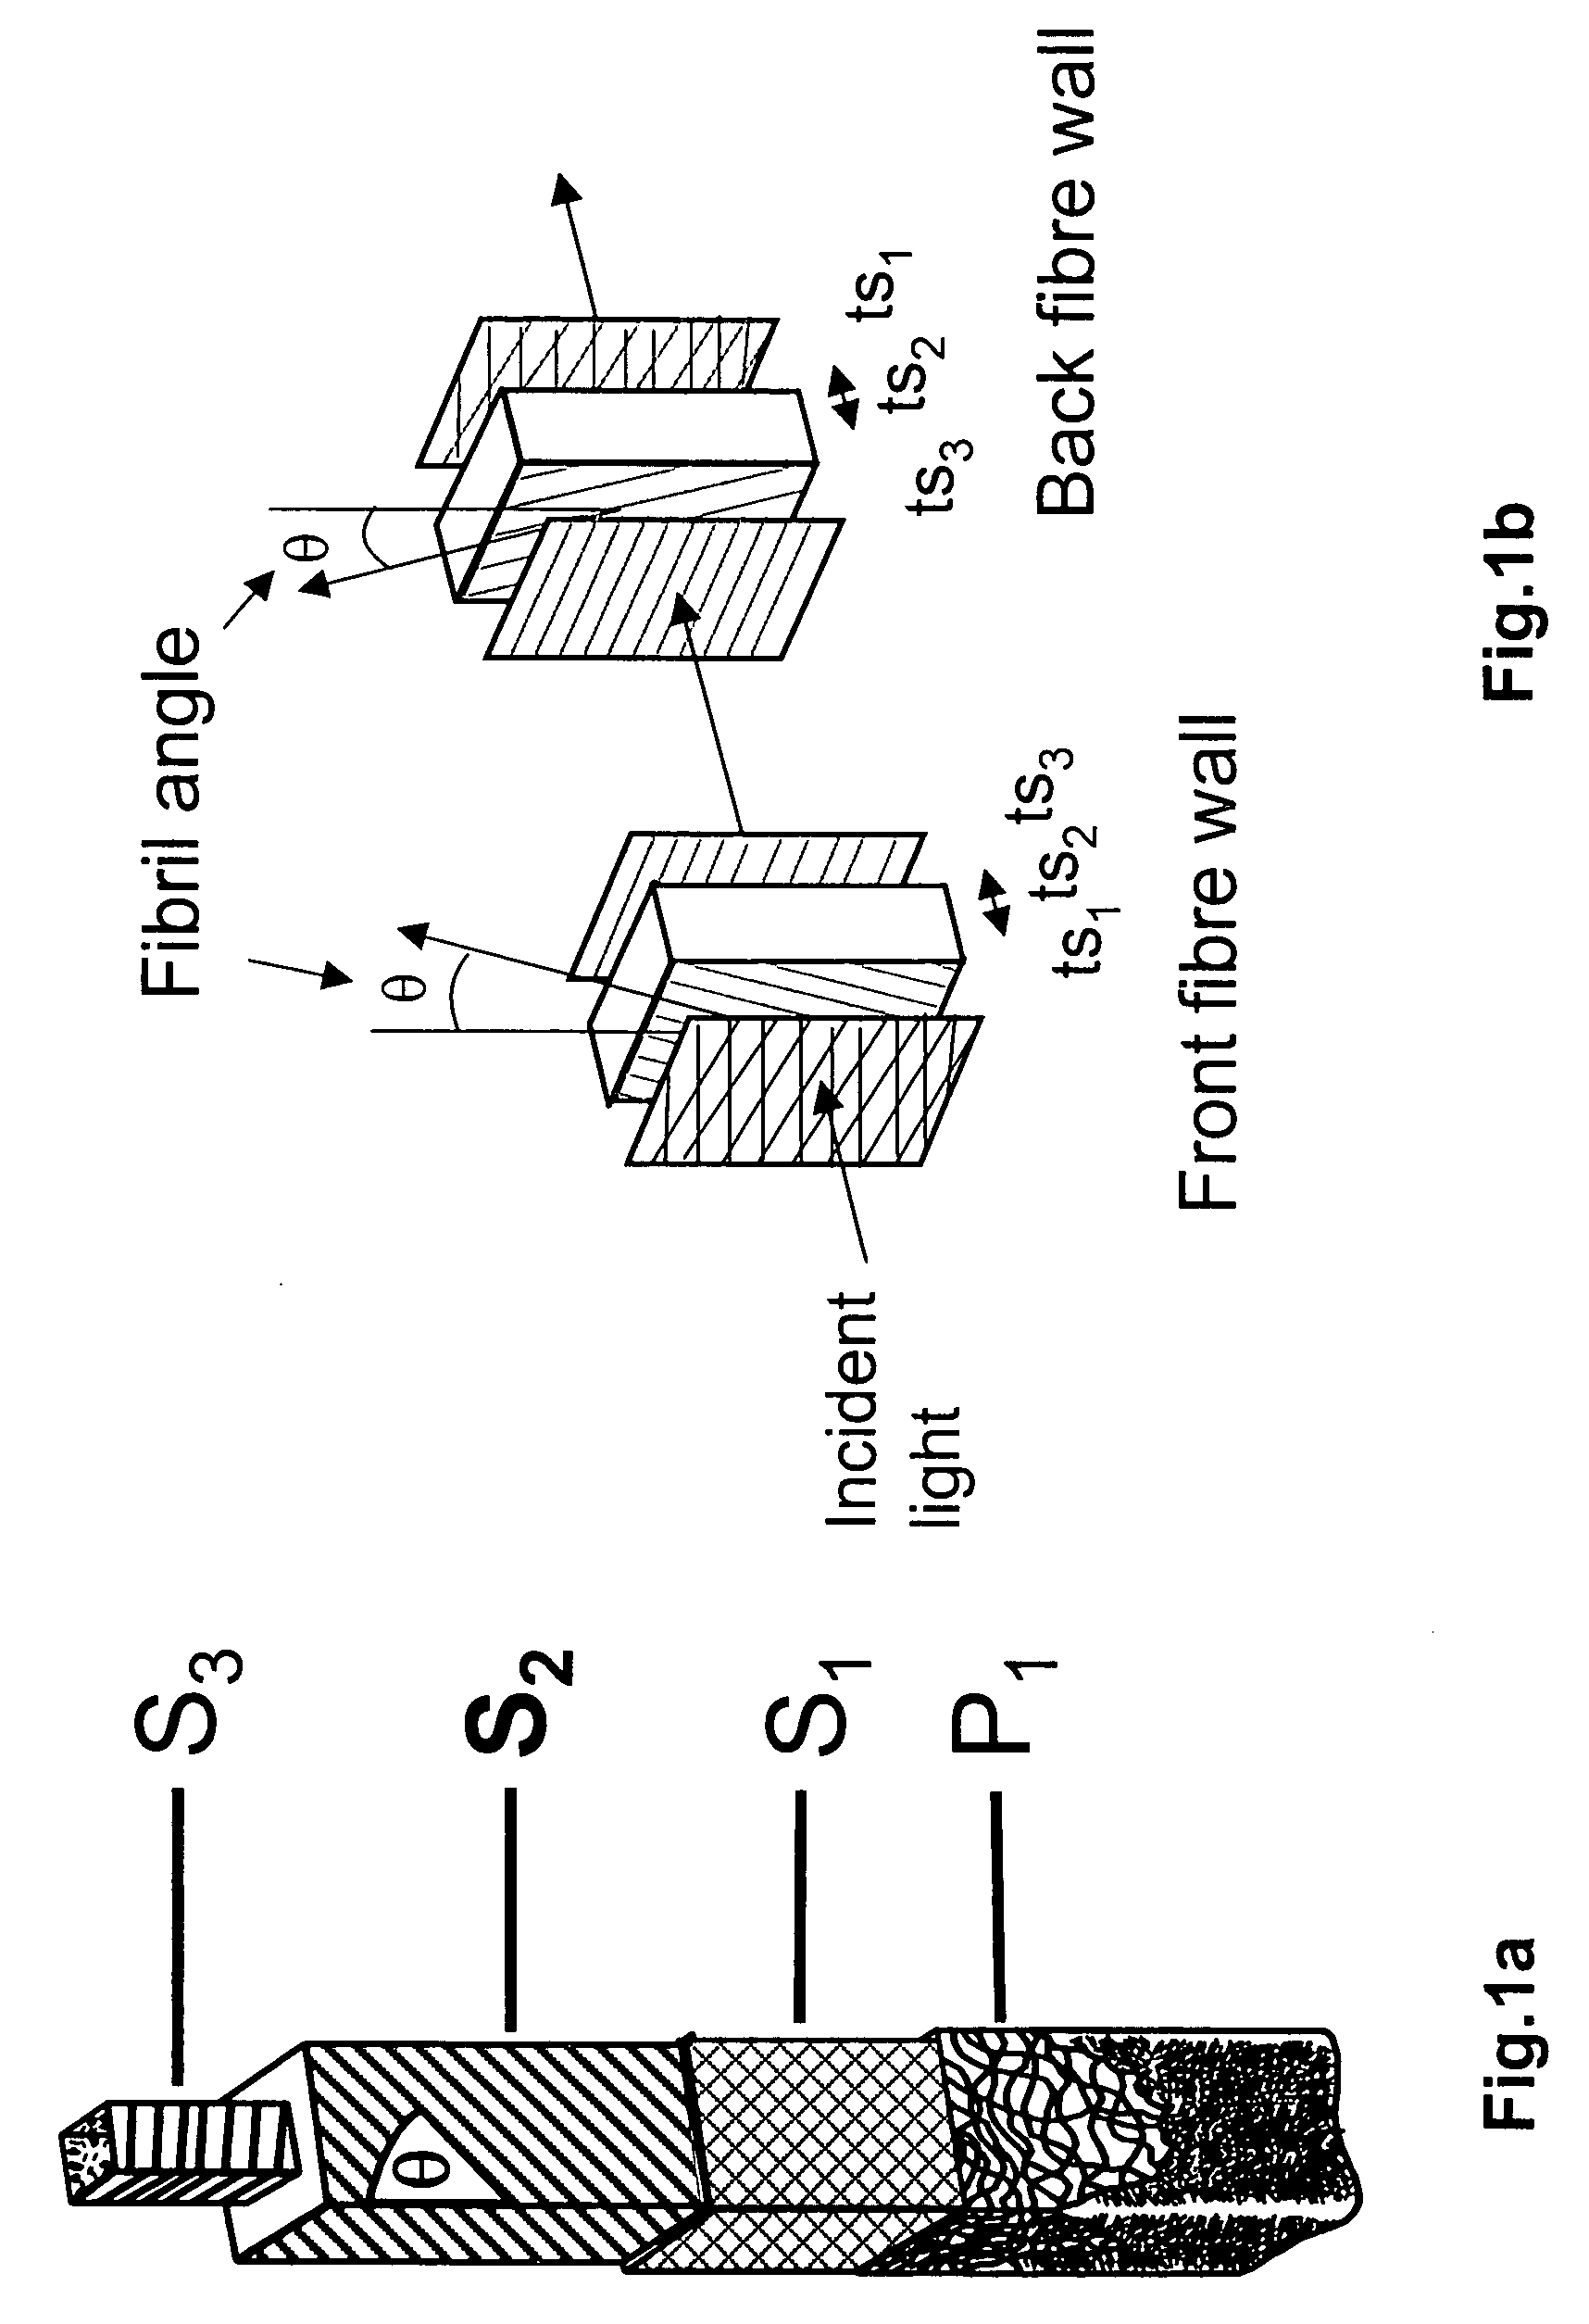 Circularly polarized light method and device for determining wall thickness and orientations of fibrils of cellulosic fibres